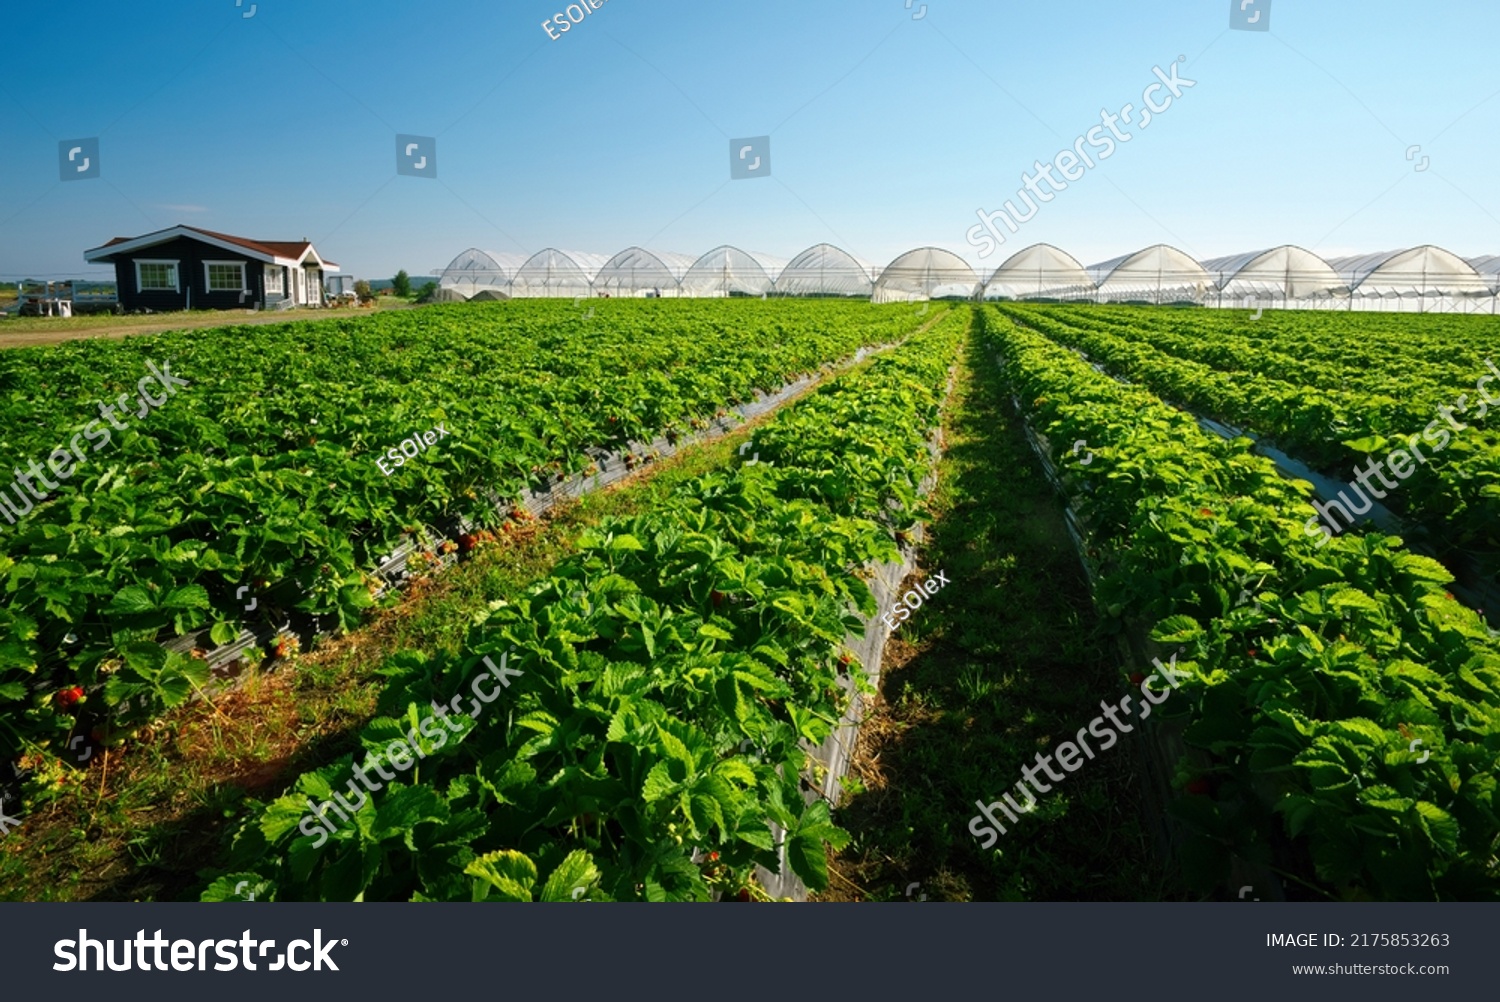 Hothouse used for growing strawberries in Karelia. Greenhouses for young strawberry plants on the field. Strawberry plantation. Long rows #2175853263